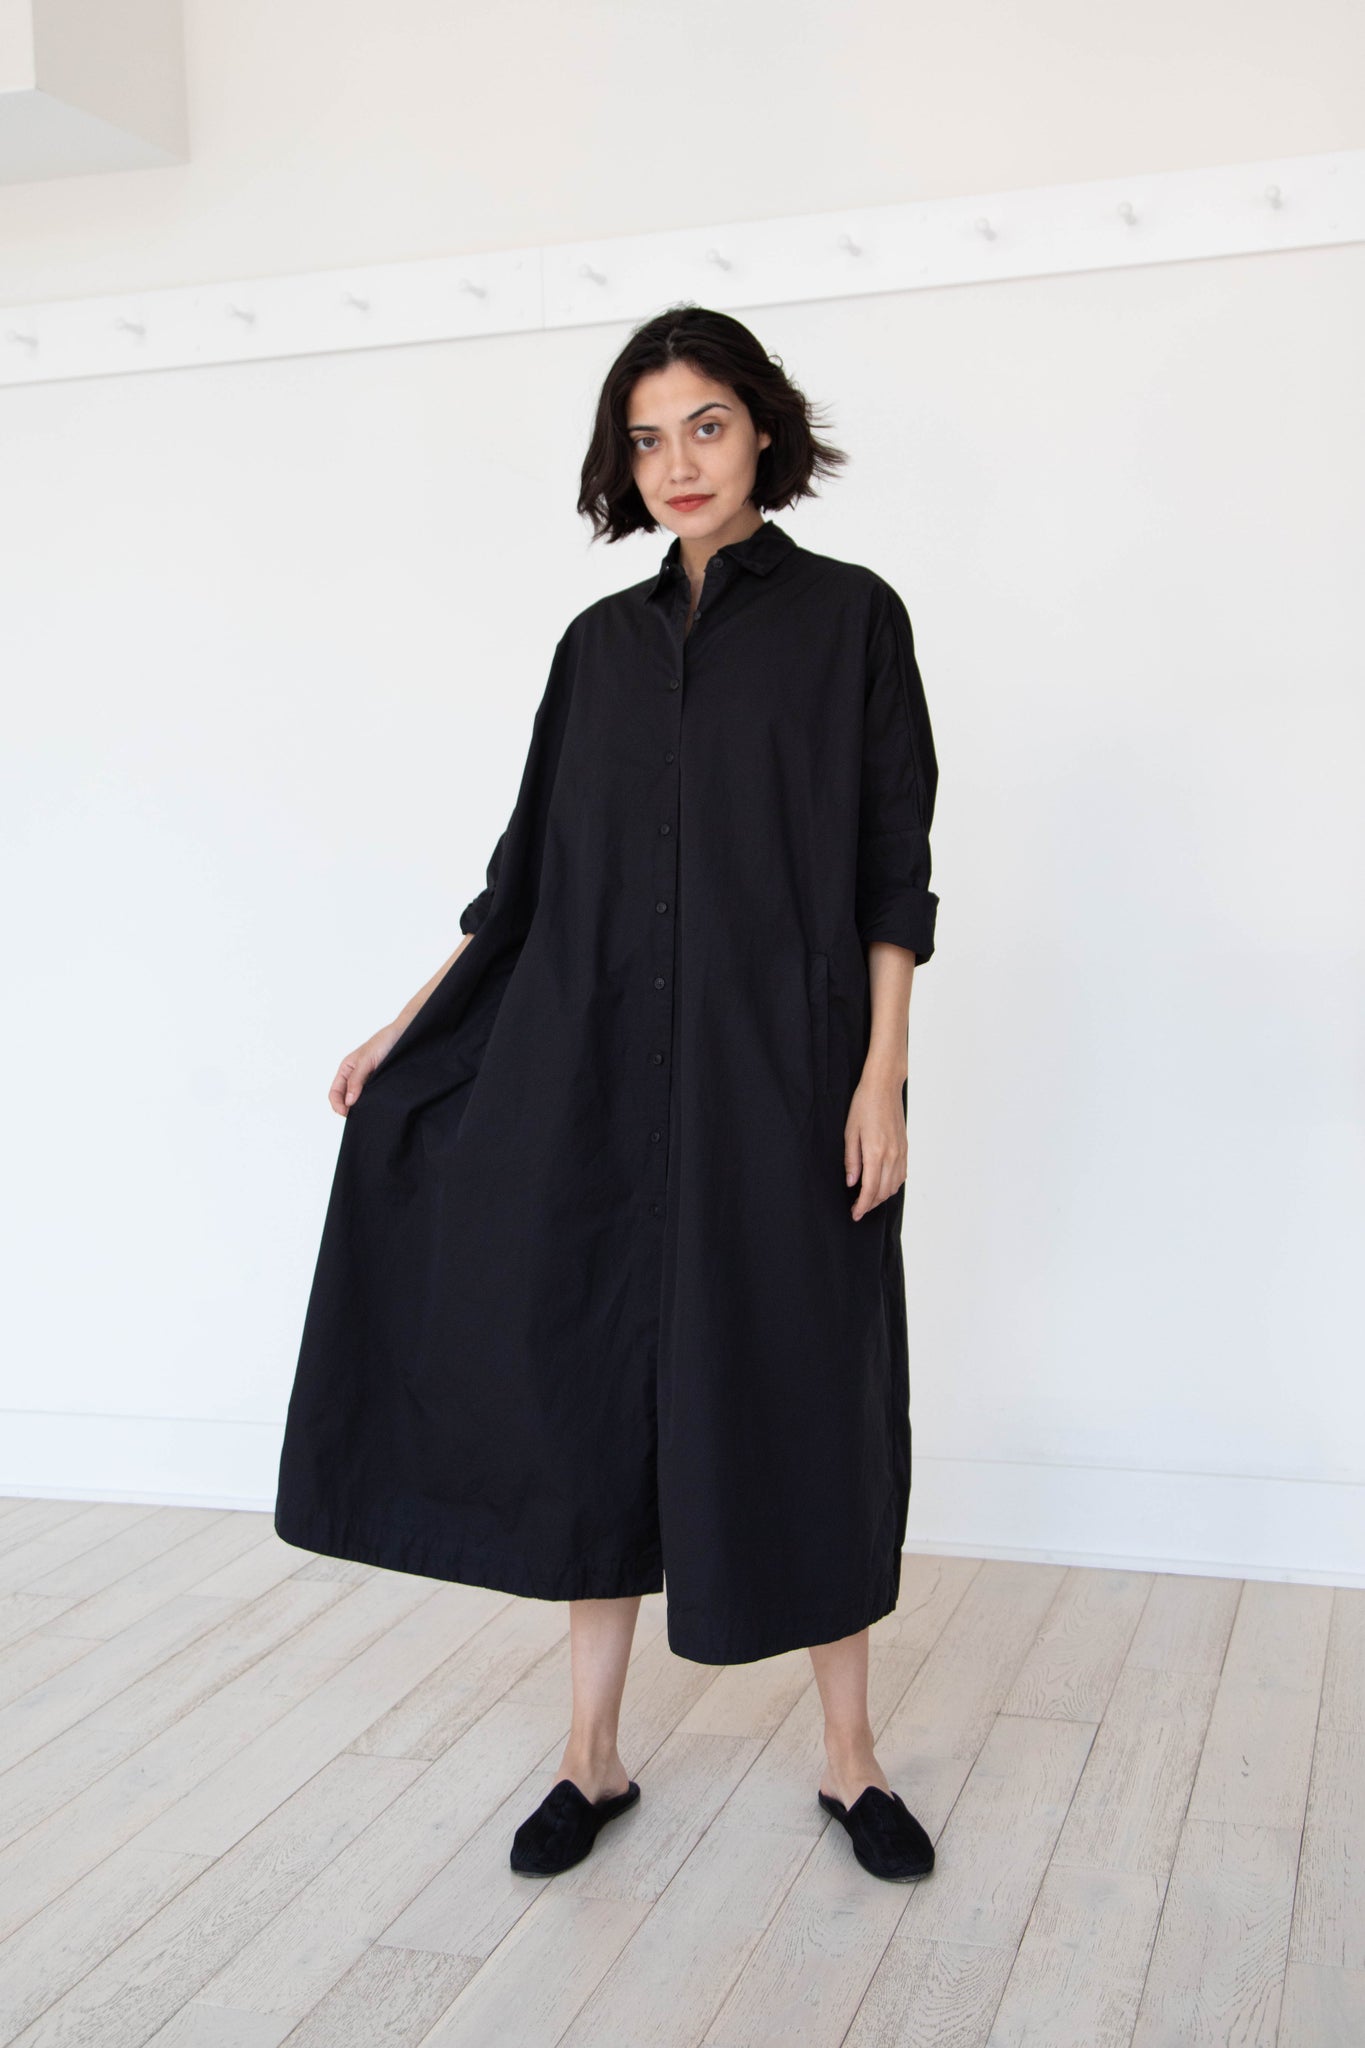 Casey Casey | Atomless Less Dress in Black